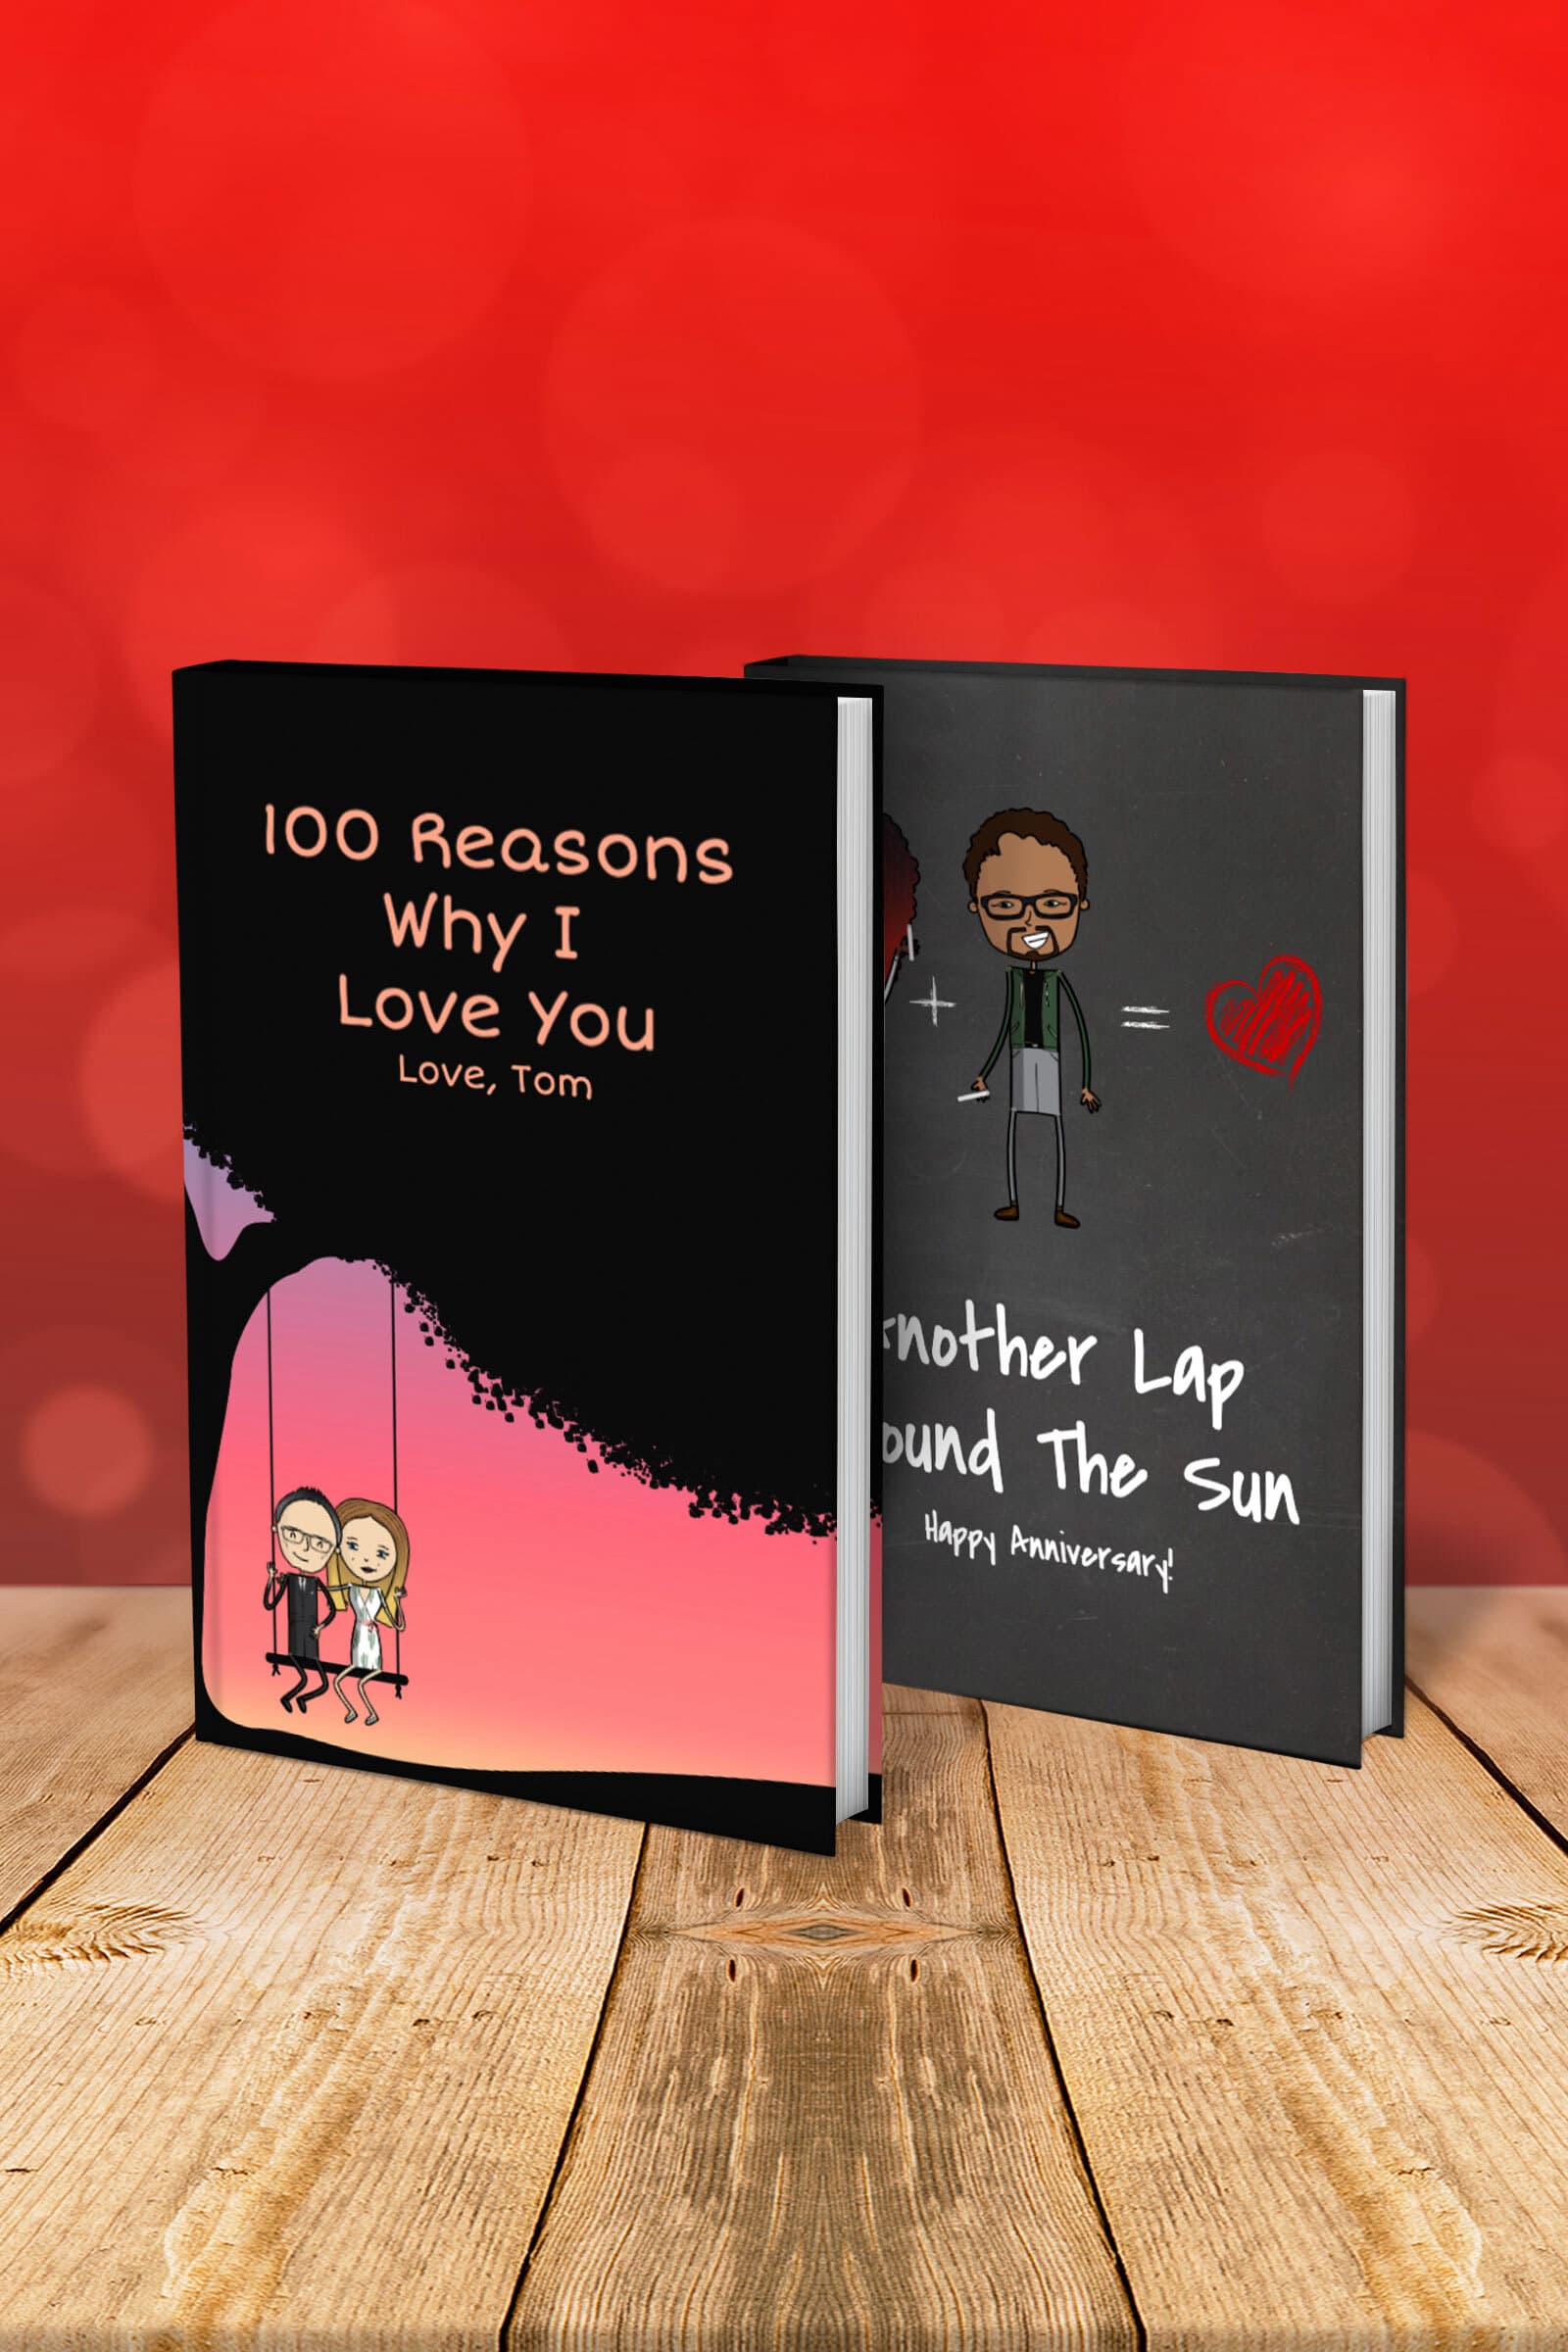 https://lovebookonline.com/img/occasion/100-reasons-why-i-love-you/560/section-1-1600.jpg?v4